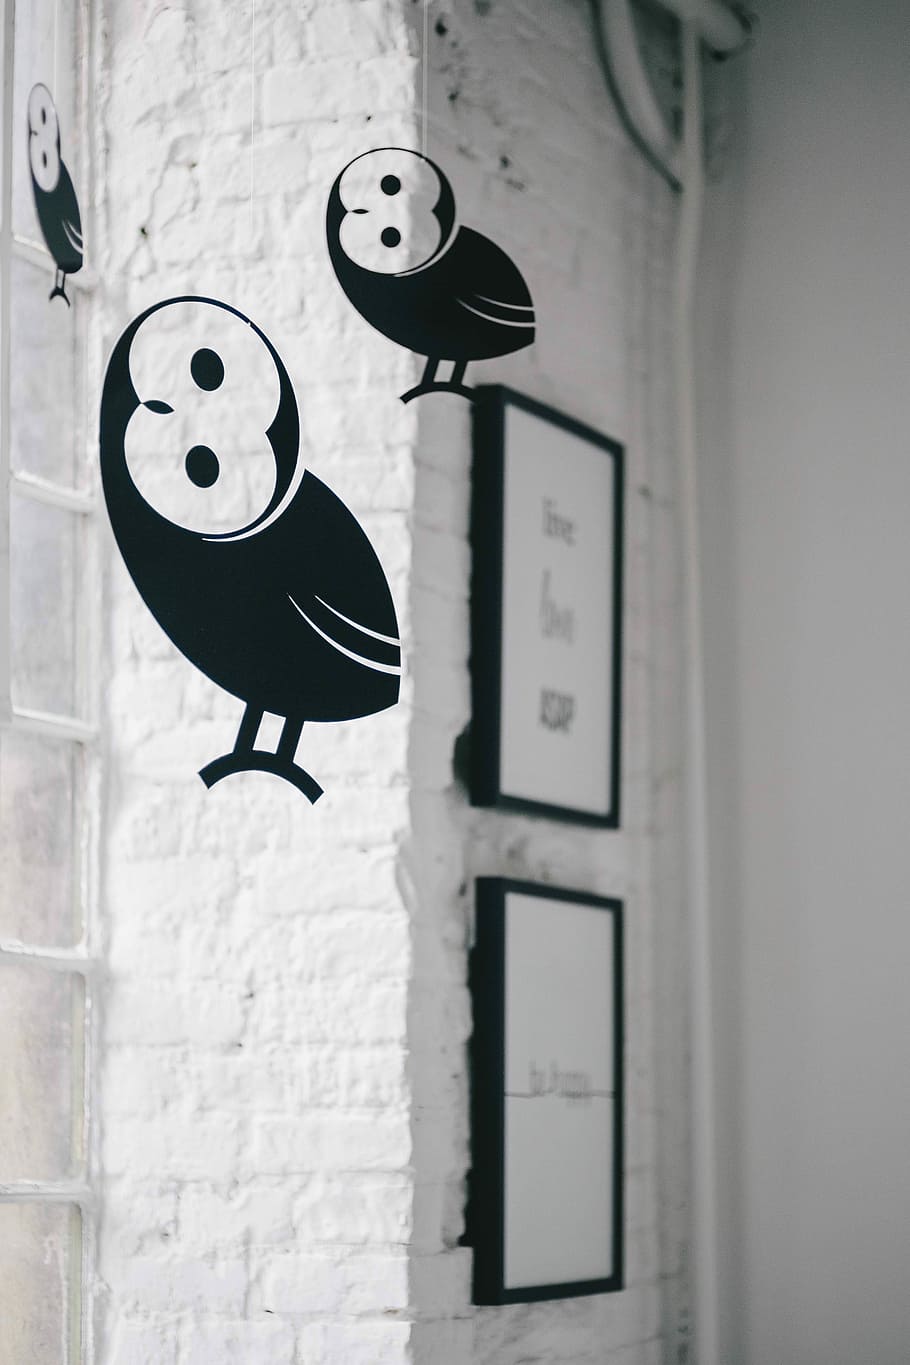 Little black plastic owls hanging from a ceiling, birds, wall - Building Feature